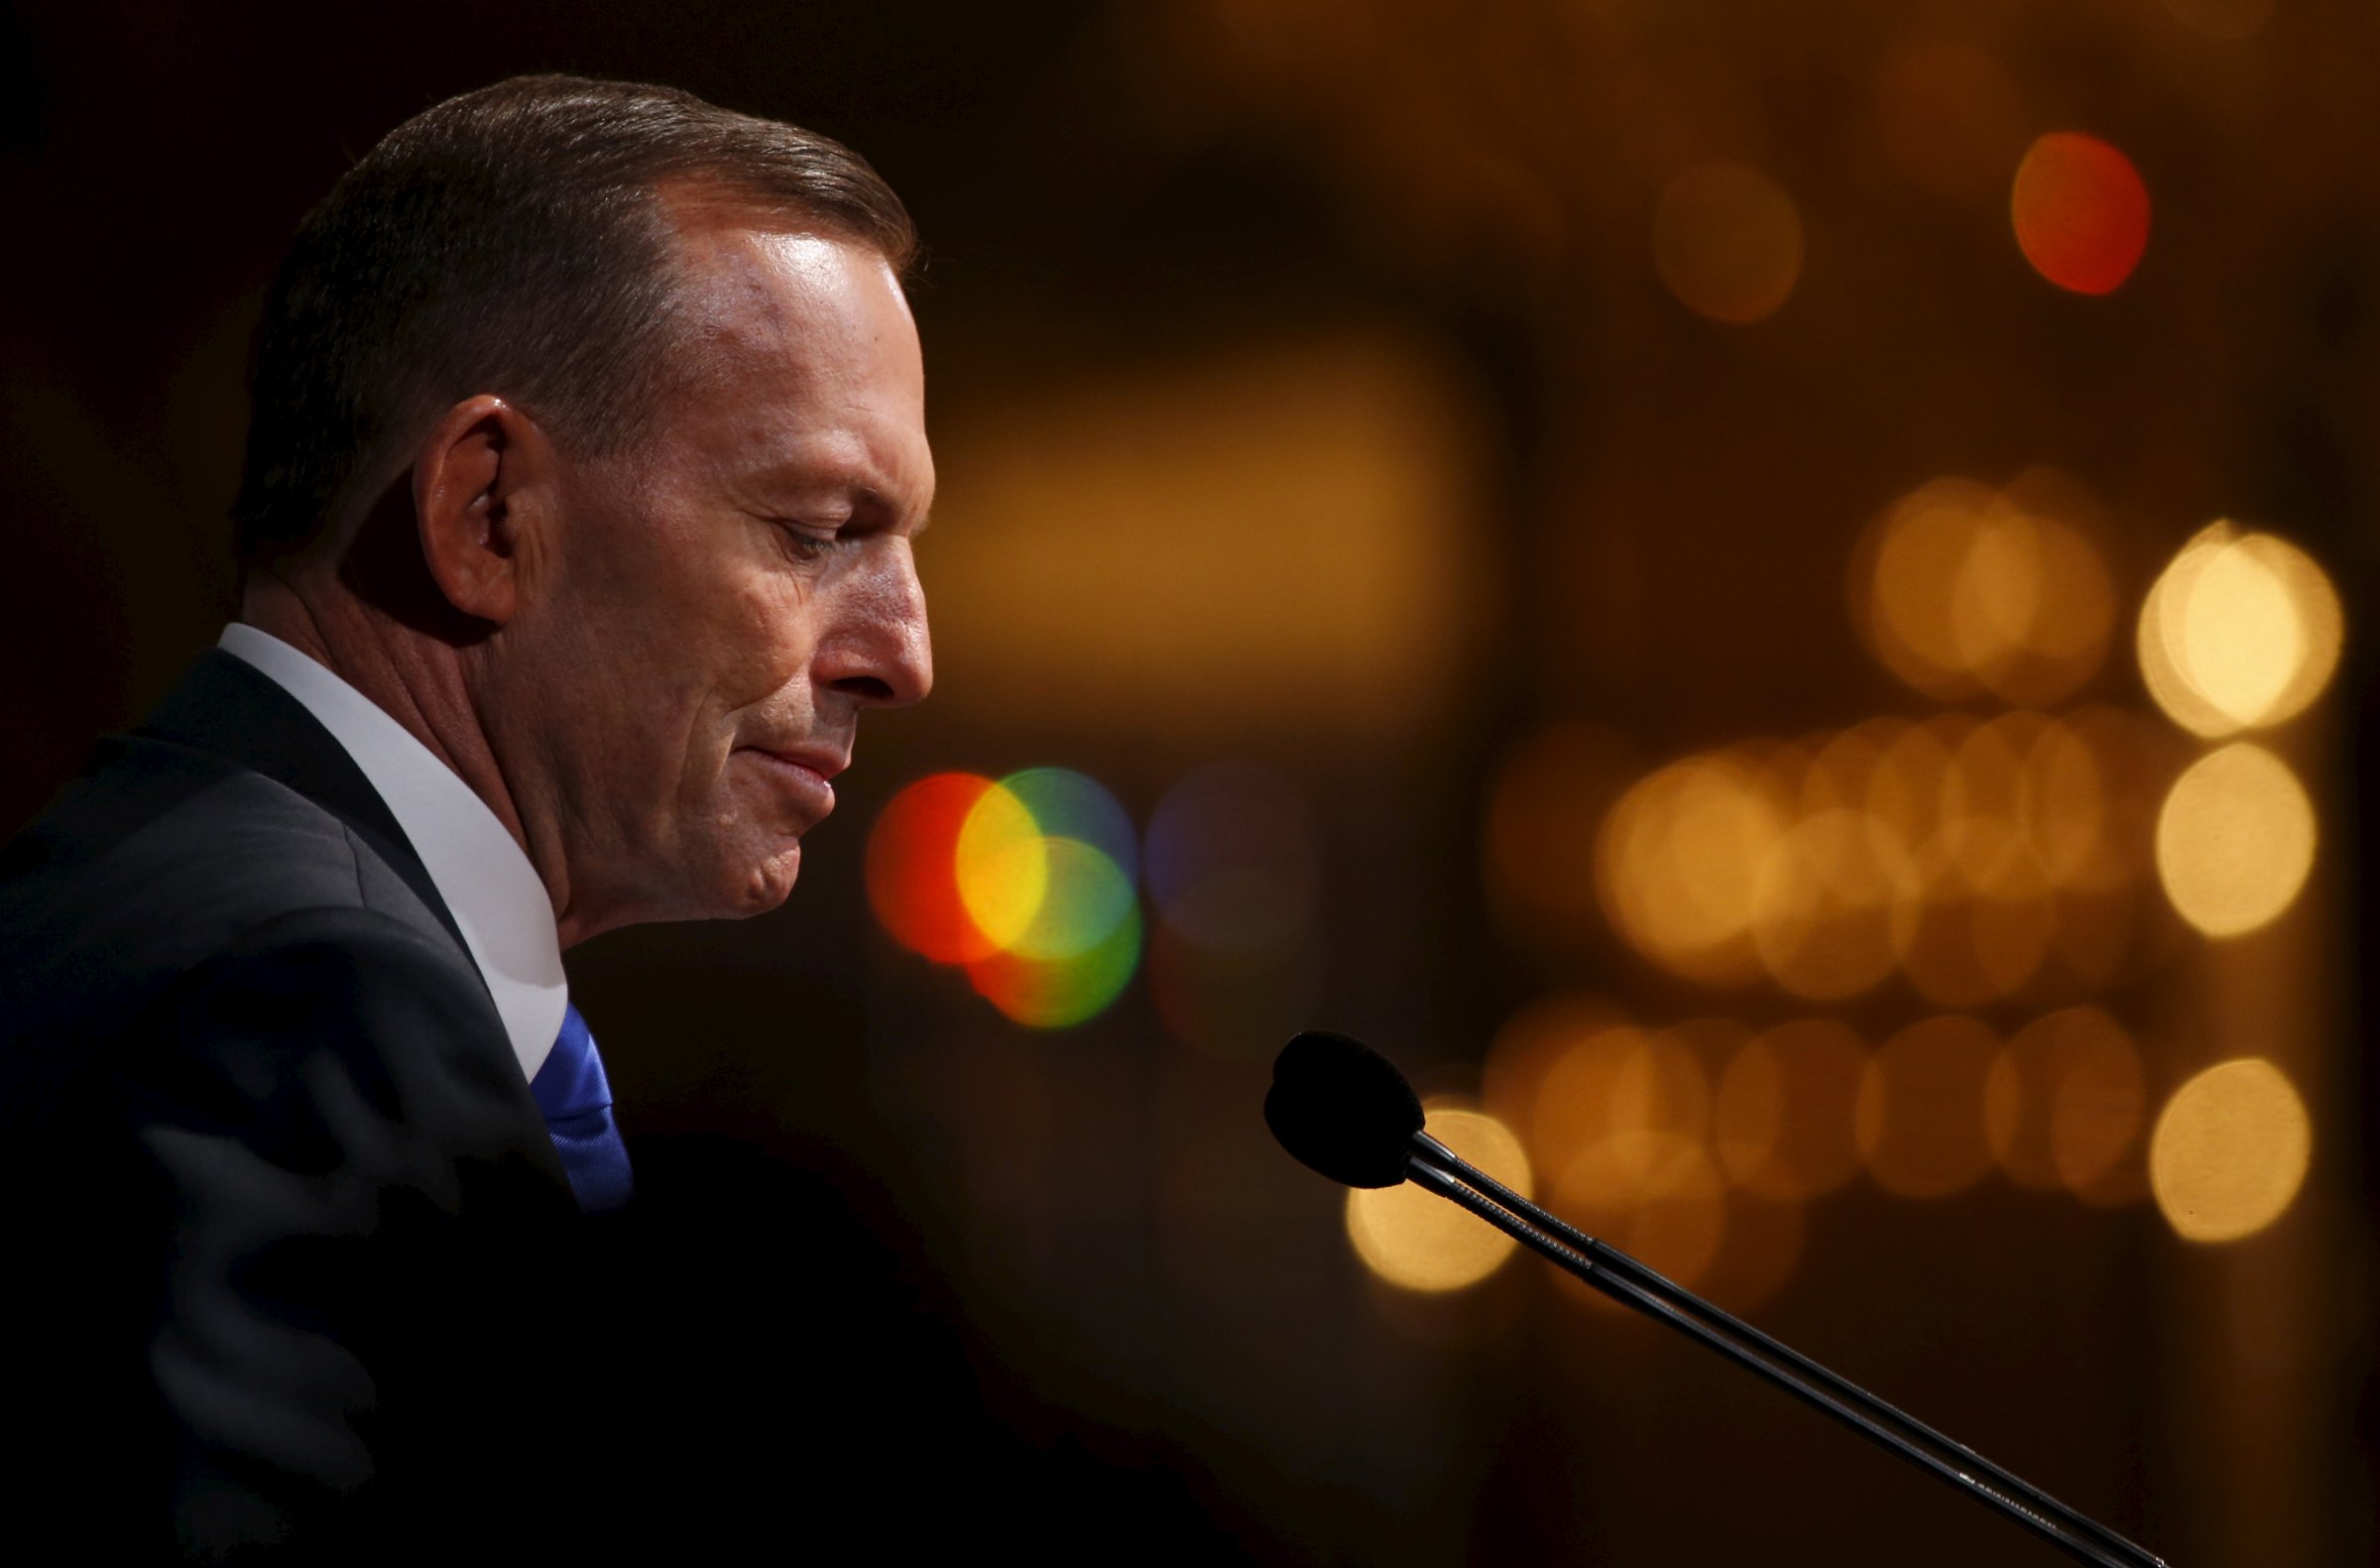 Australia's Prime Minister Tony Abbott delivers a lecture on "Our Common Challenges: Strengthening Security in the Region" in Singapore